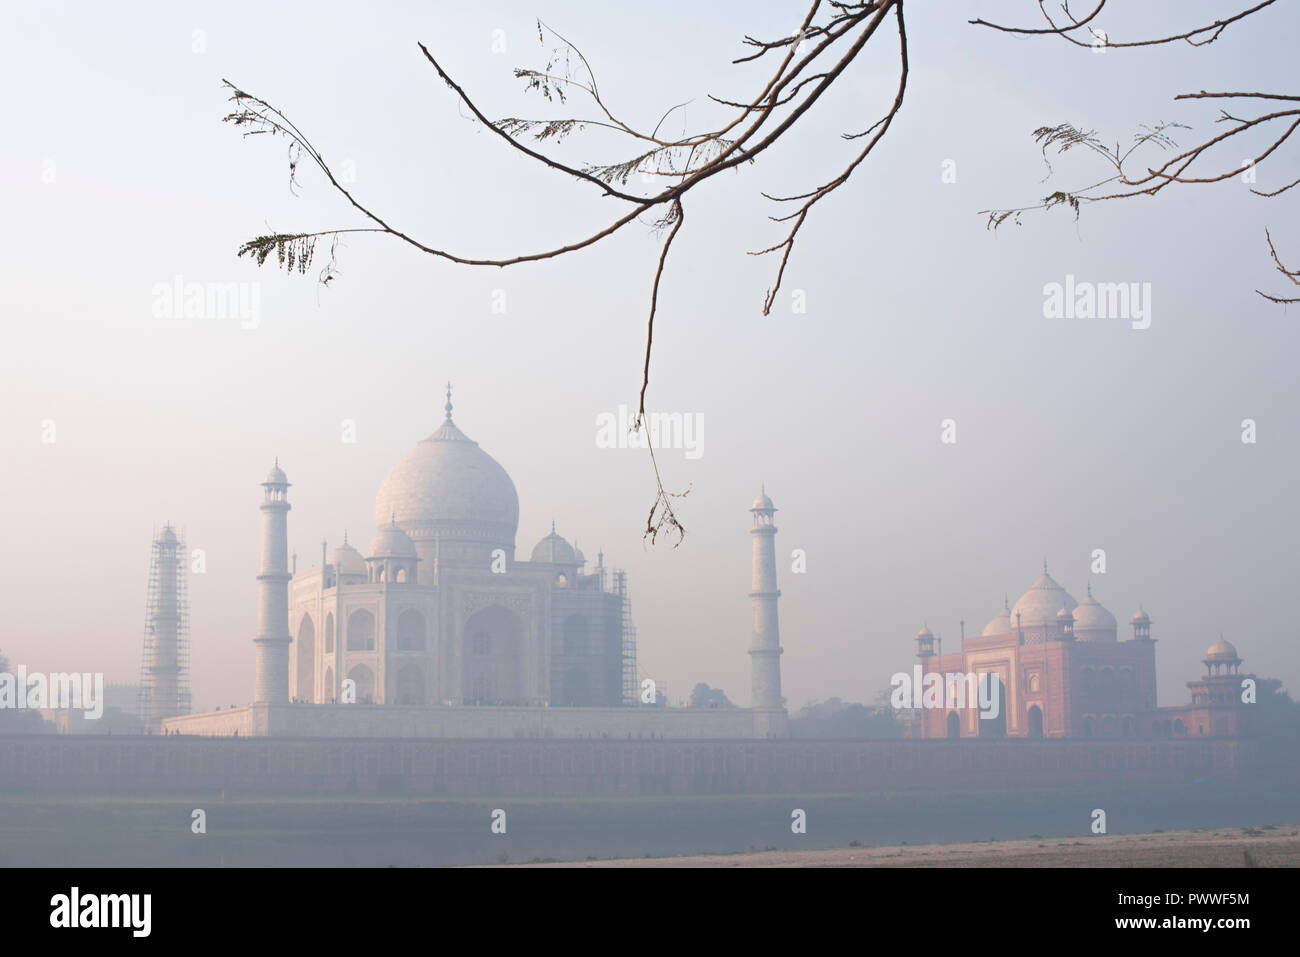 Taj Mahal the wonder of the world and the pride of India in winter morning soft warm light with haze and framed with tree branches in the foreground Stock Photo